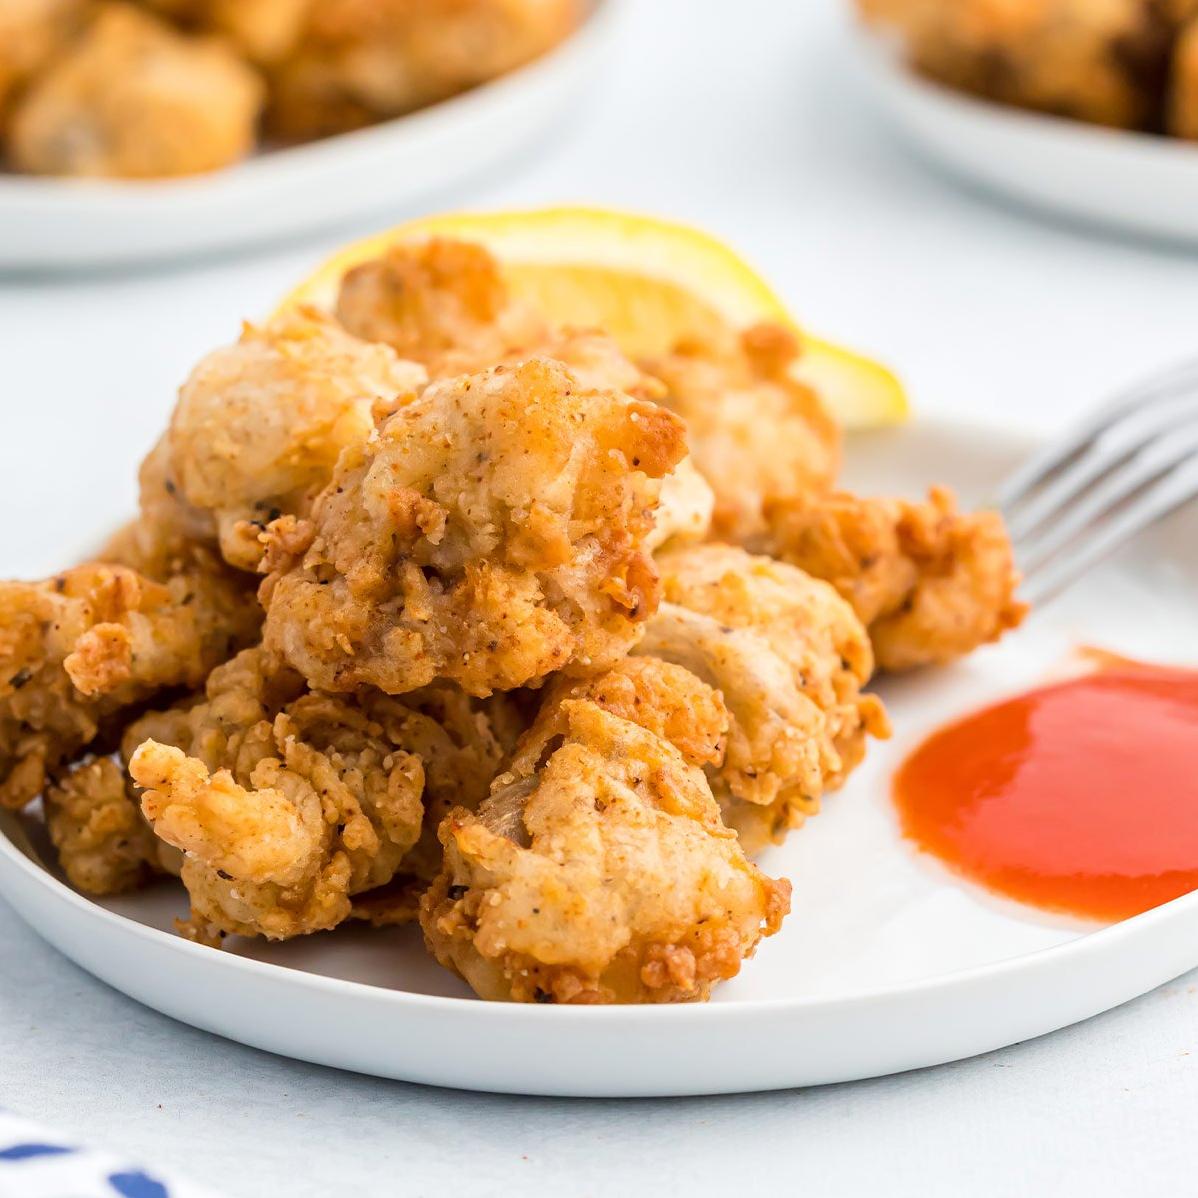  Get ready to fry up some delicious Southern Fried Gizzards in a Buttermilk Brine!